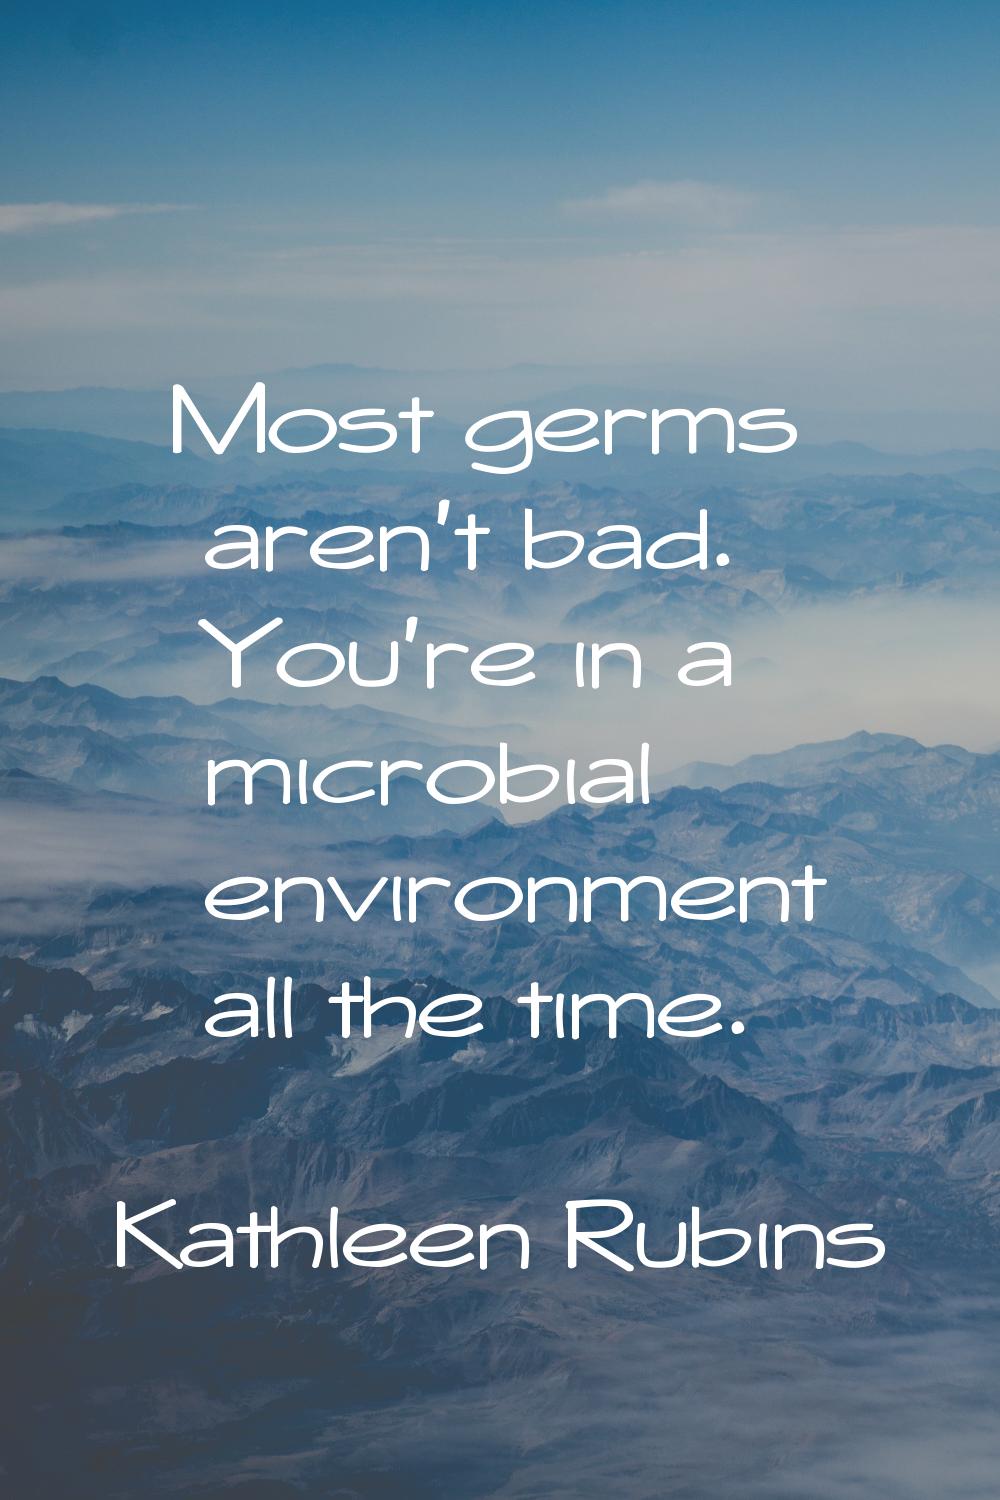 Most germs aren't bad. You're in a microbial environment all the time.